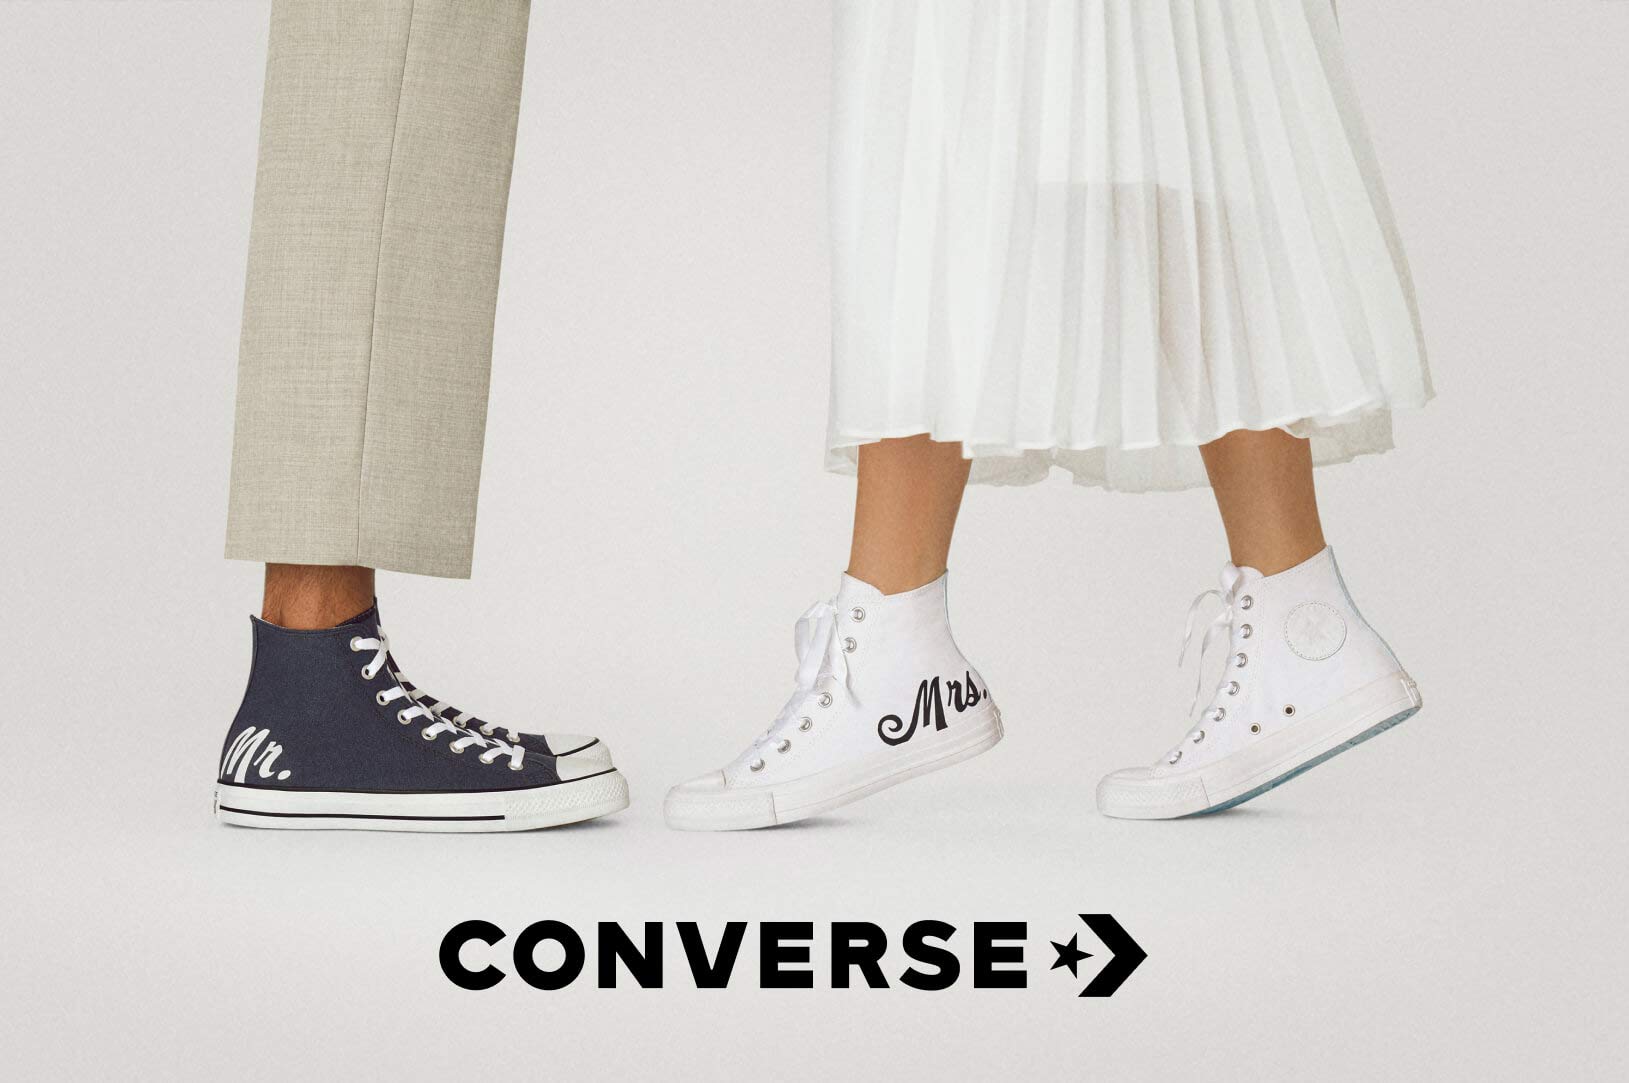 bride and groom wearing mr. and mrs. sneakers with converse logo overlay